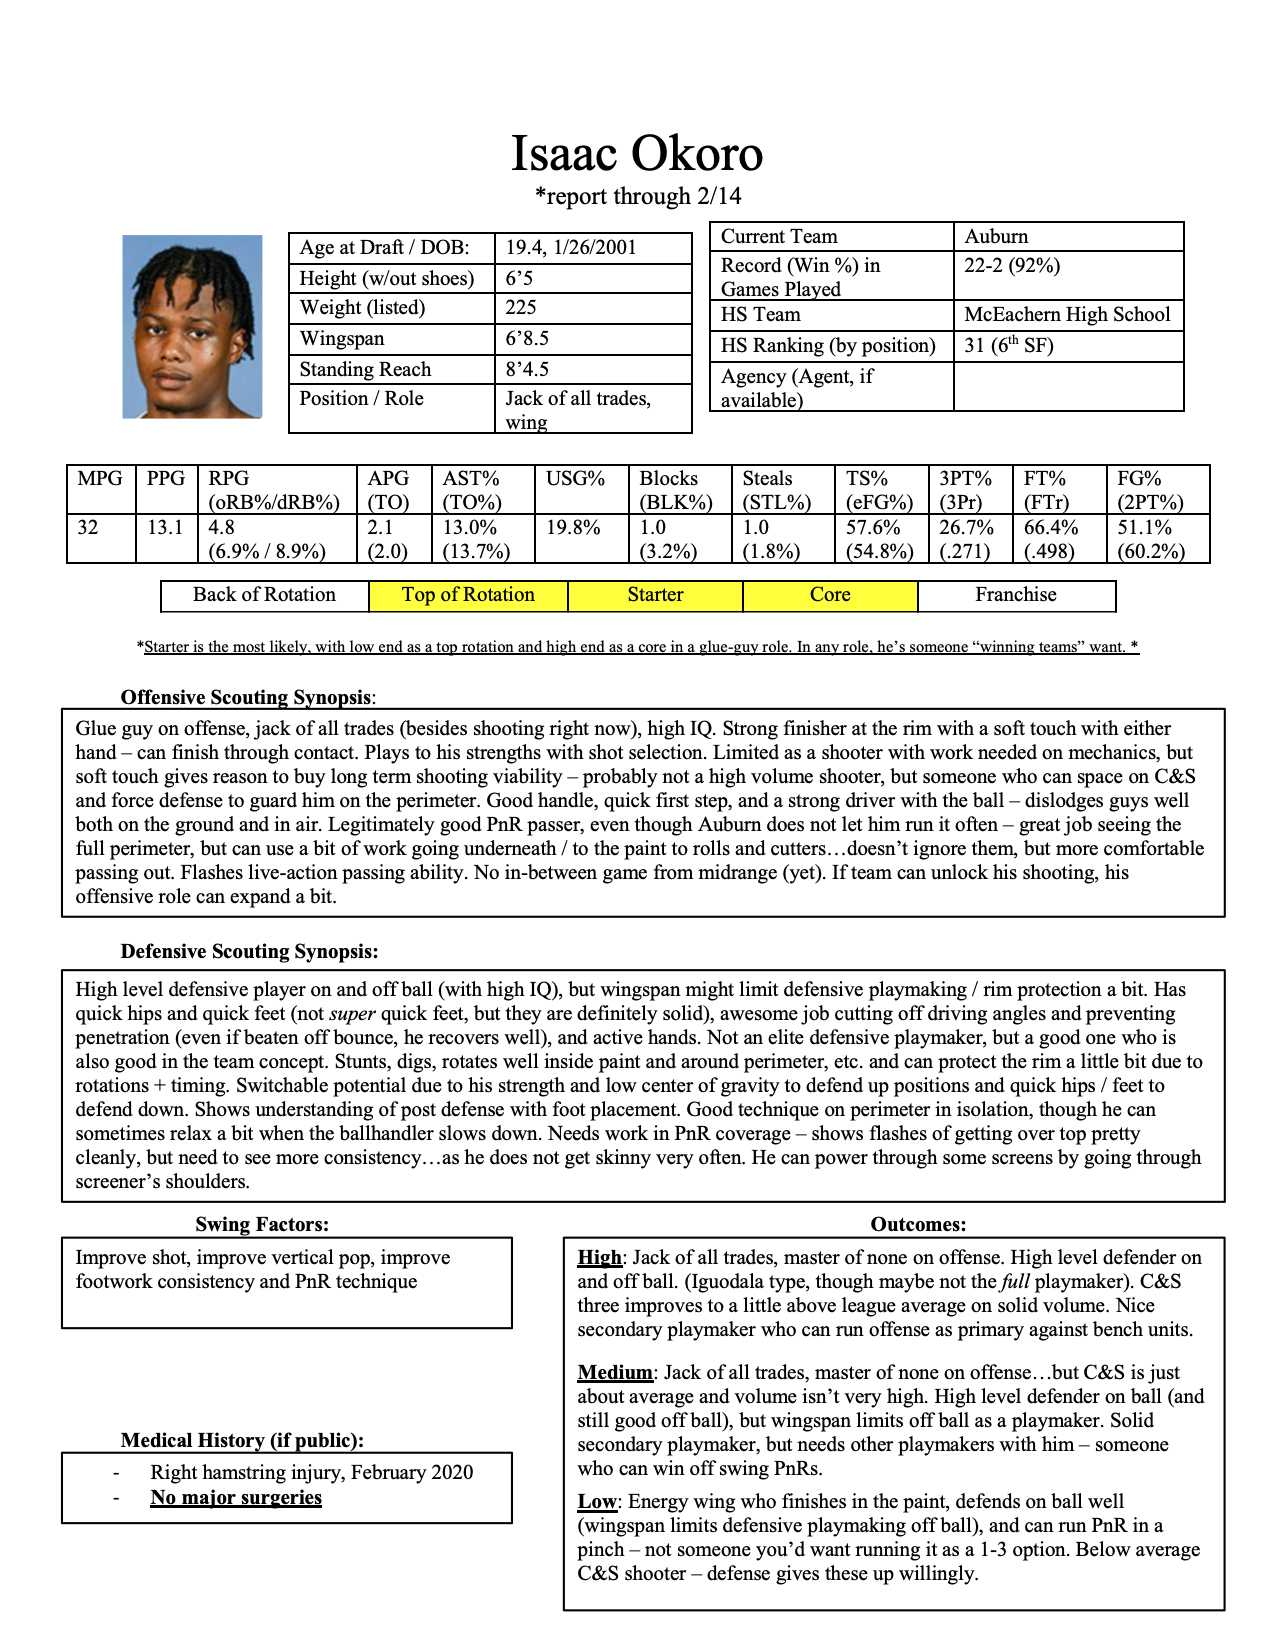 Isaac Okoro Scouting Report – The Stepien With Regard To Basketball Player Scouting Report Template